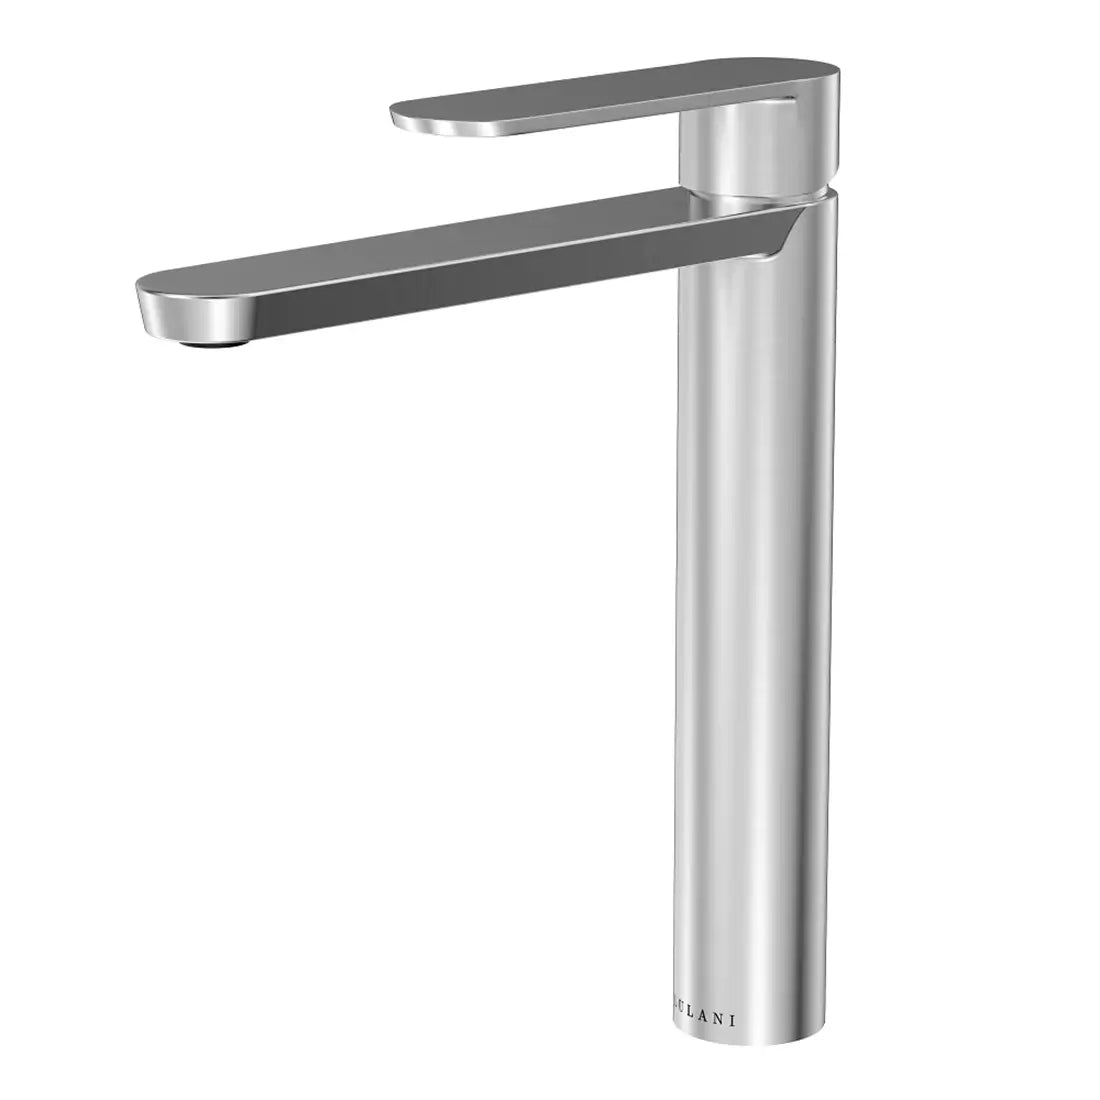 Yasawa - Vessel Bathroom Faucet with drain assembly in Brushed Stainless